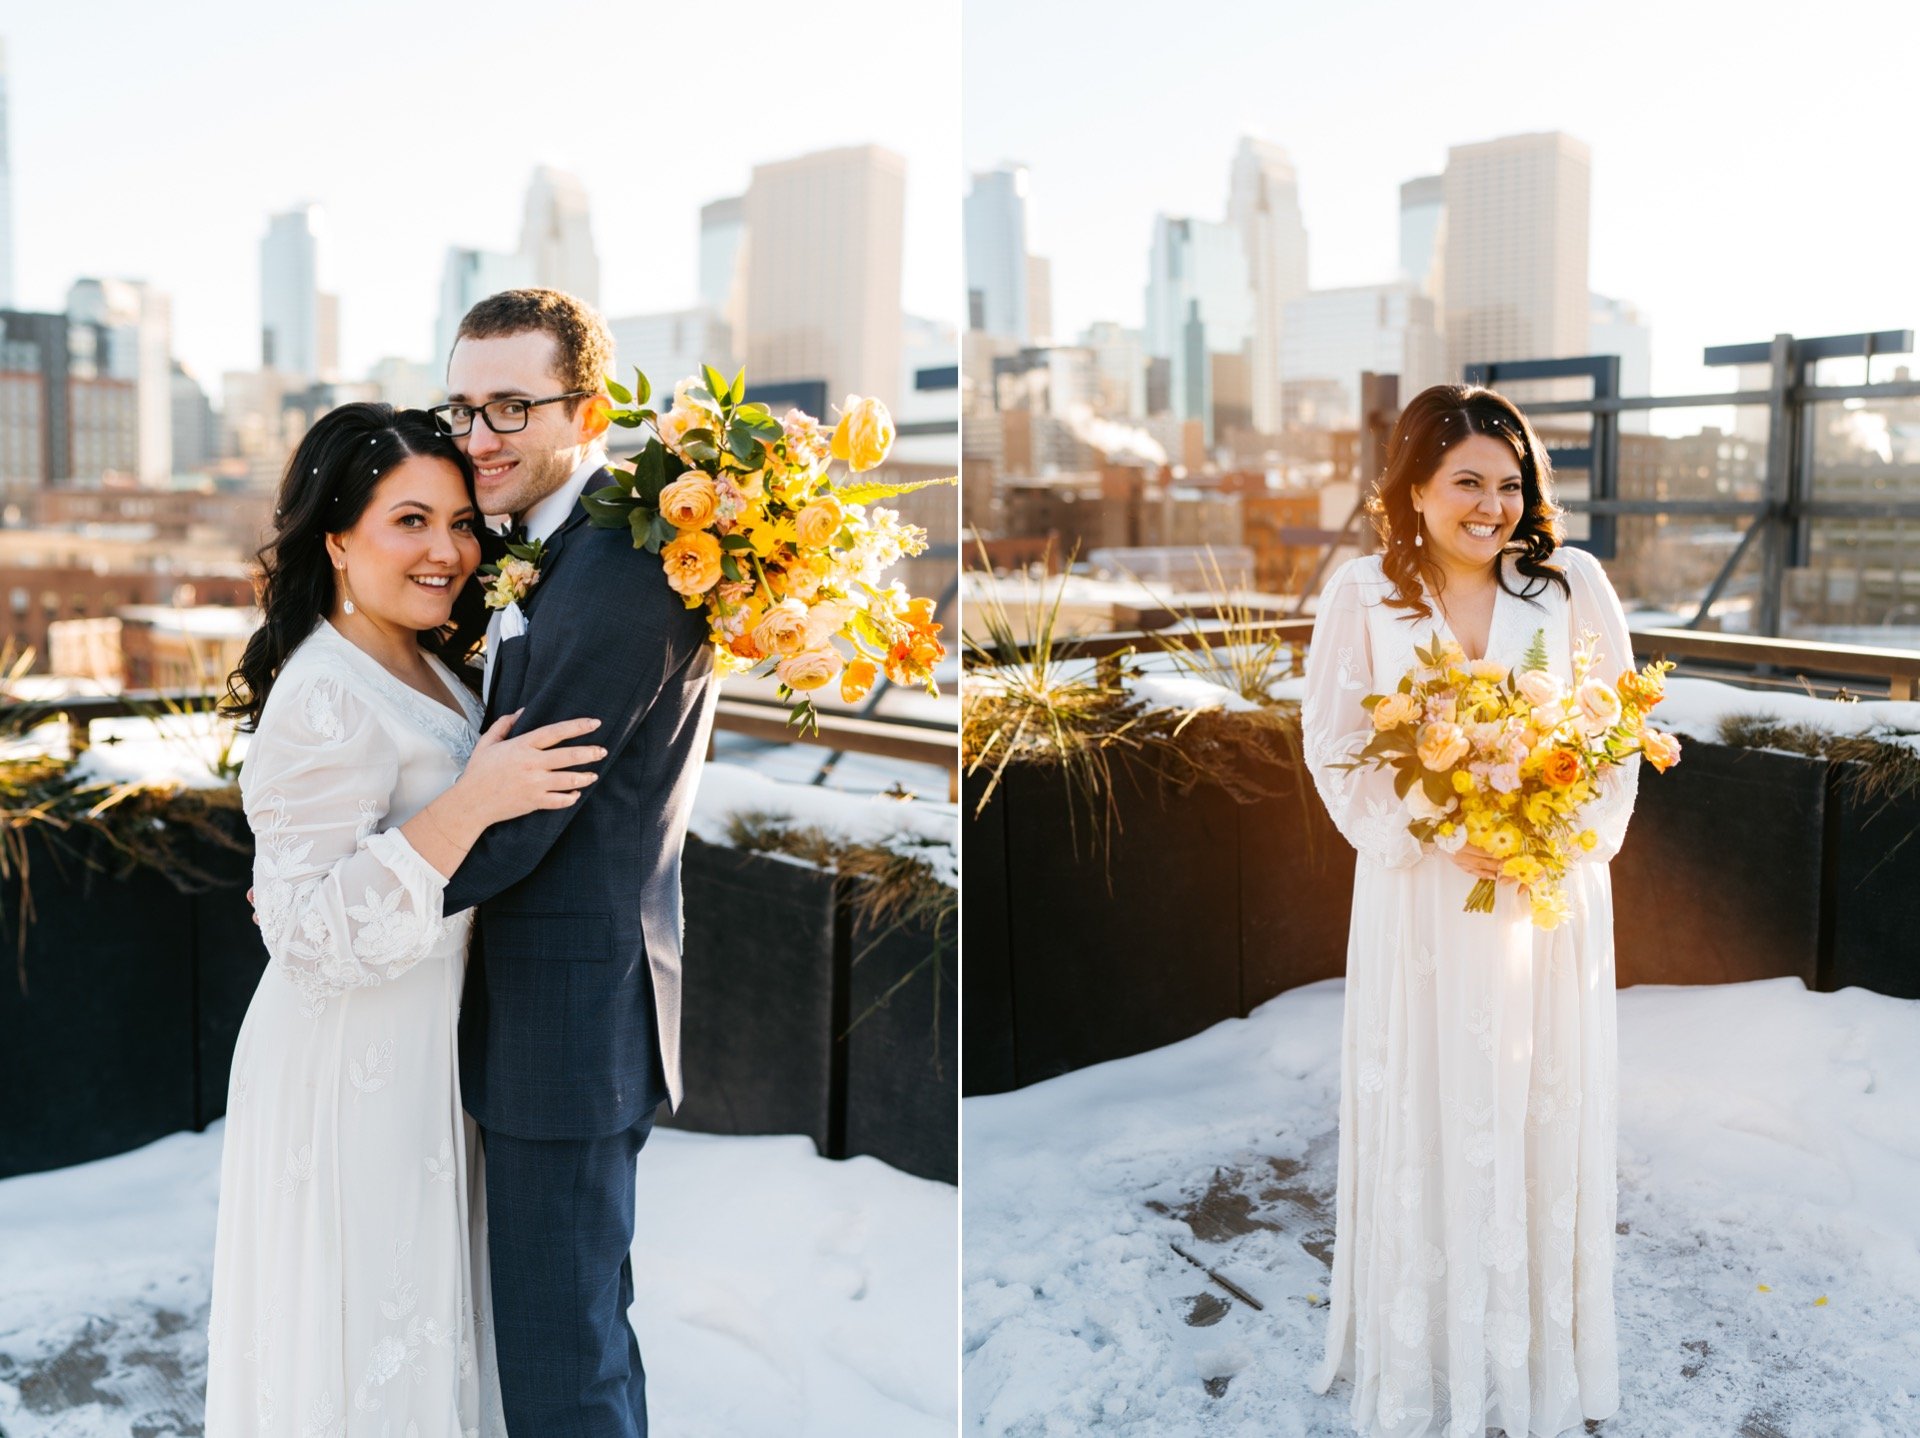 Colorful Winter Wedding at The Annex with Allison Hopperstad